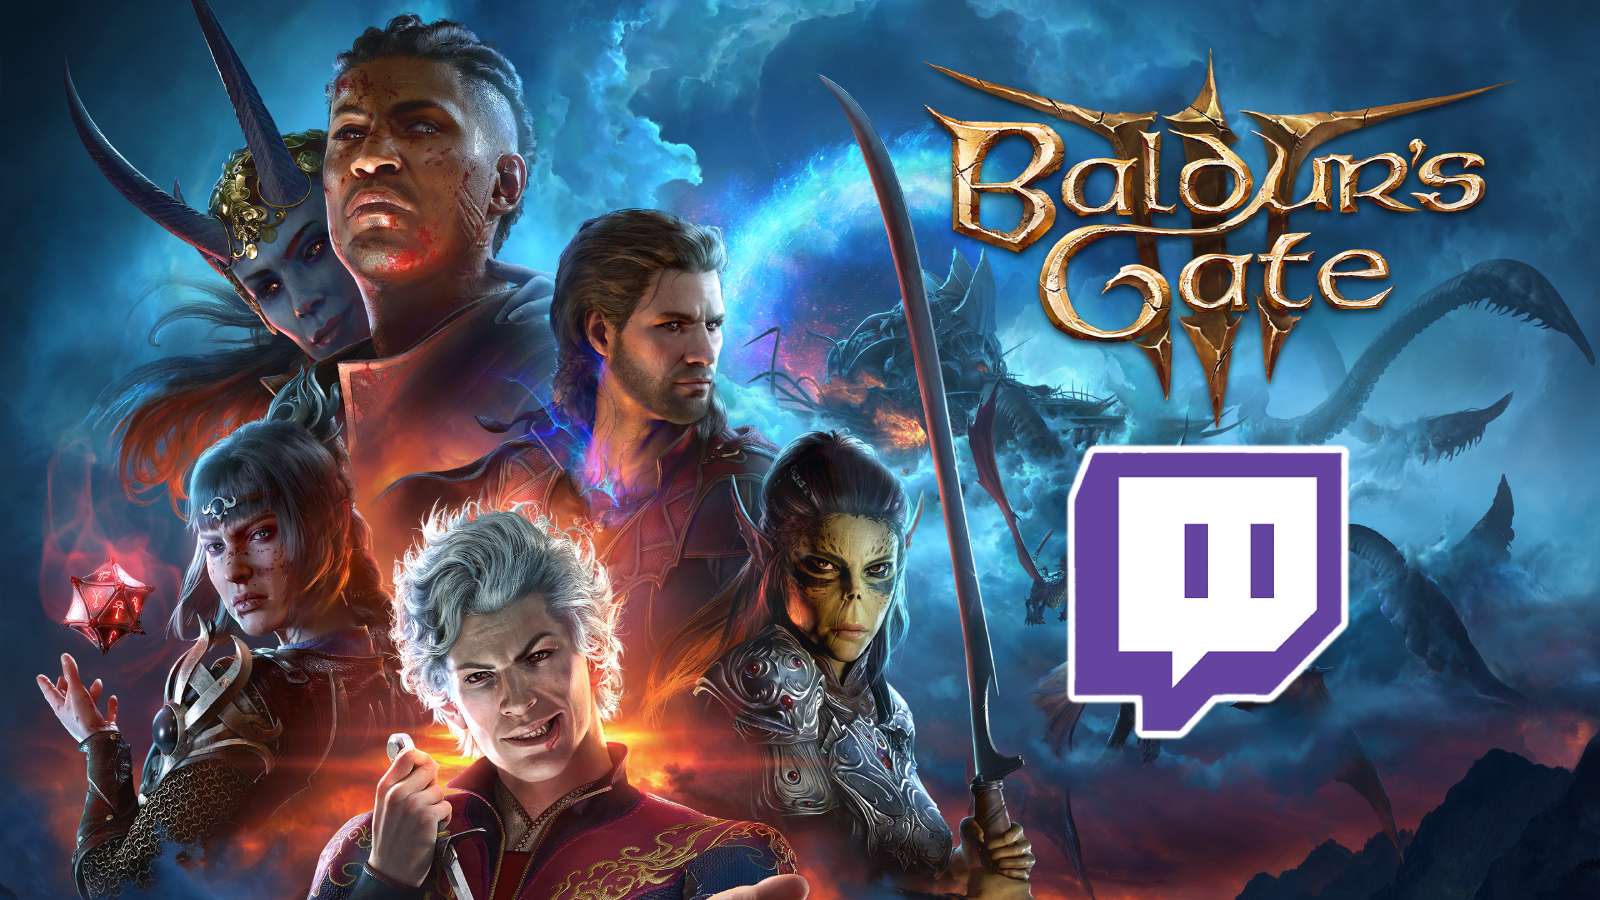 an image of Baldur's Gate 3 with the Twitch logo